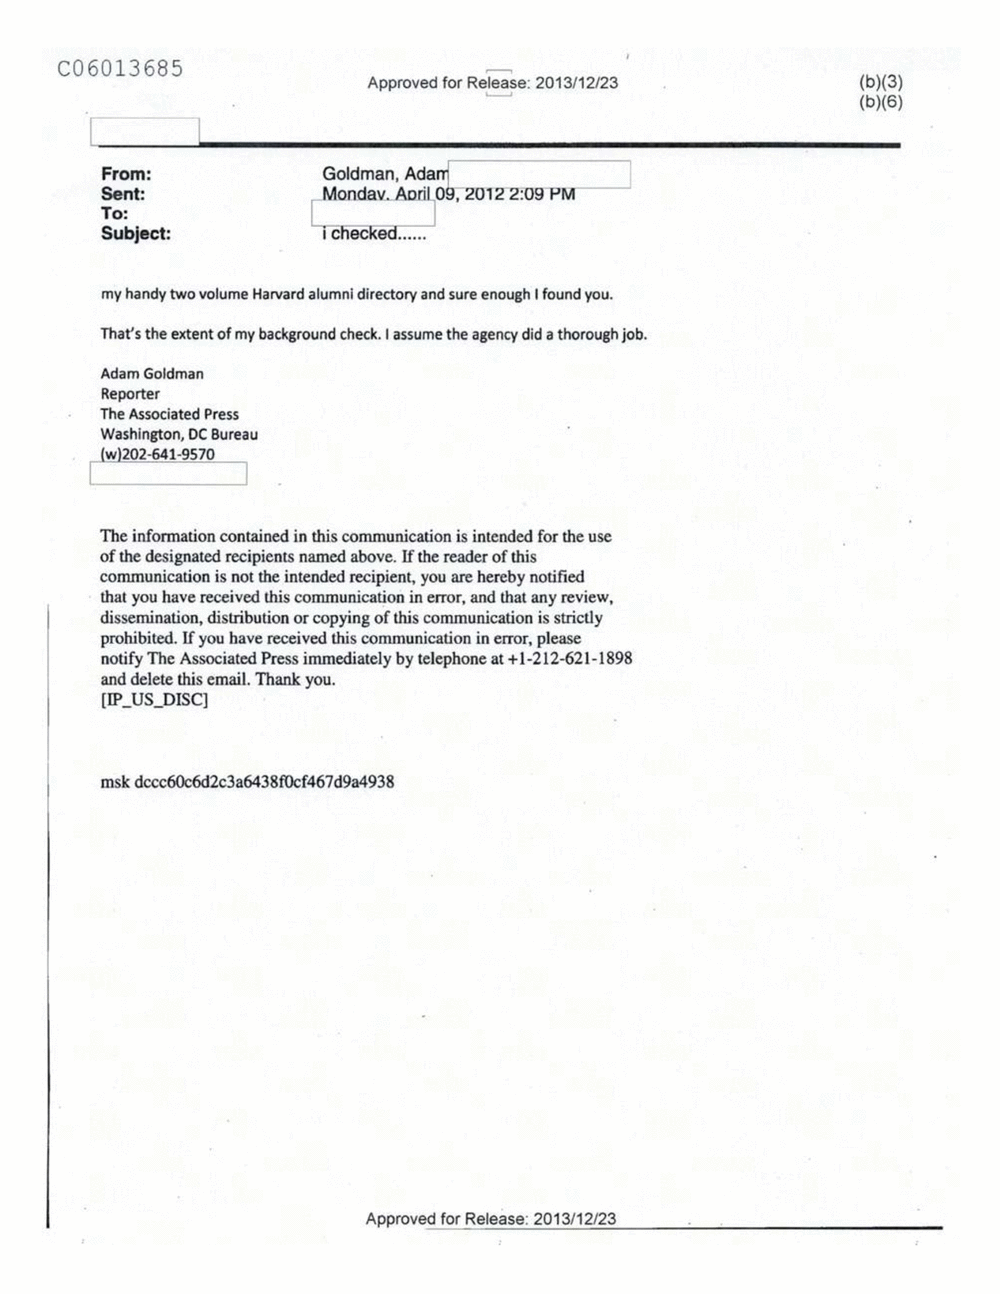 Page 540 from Email Correspondence Between Reporters and CIA Flacks